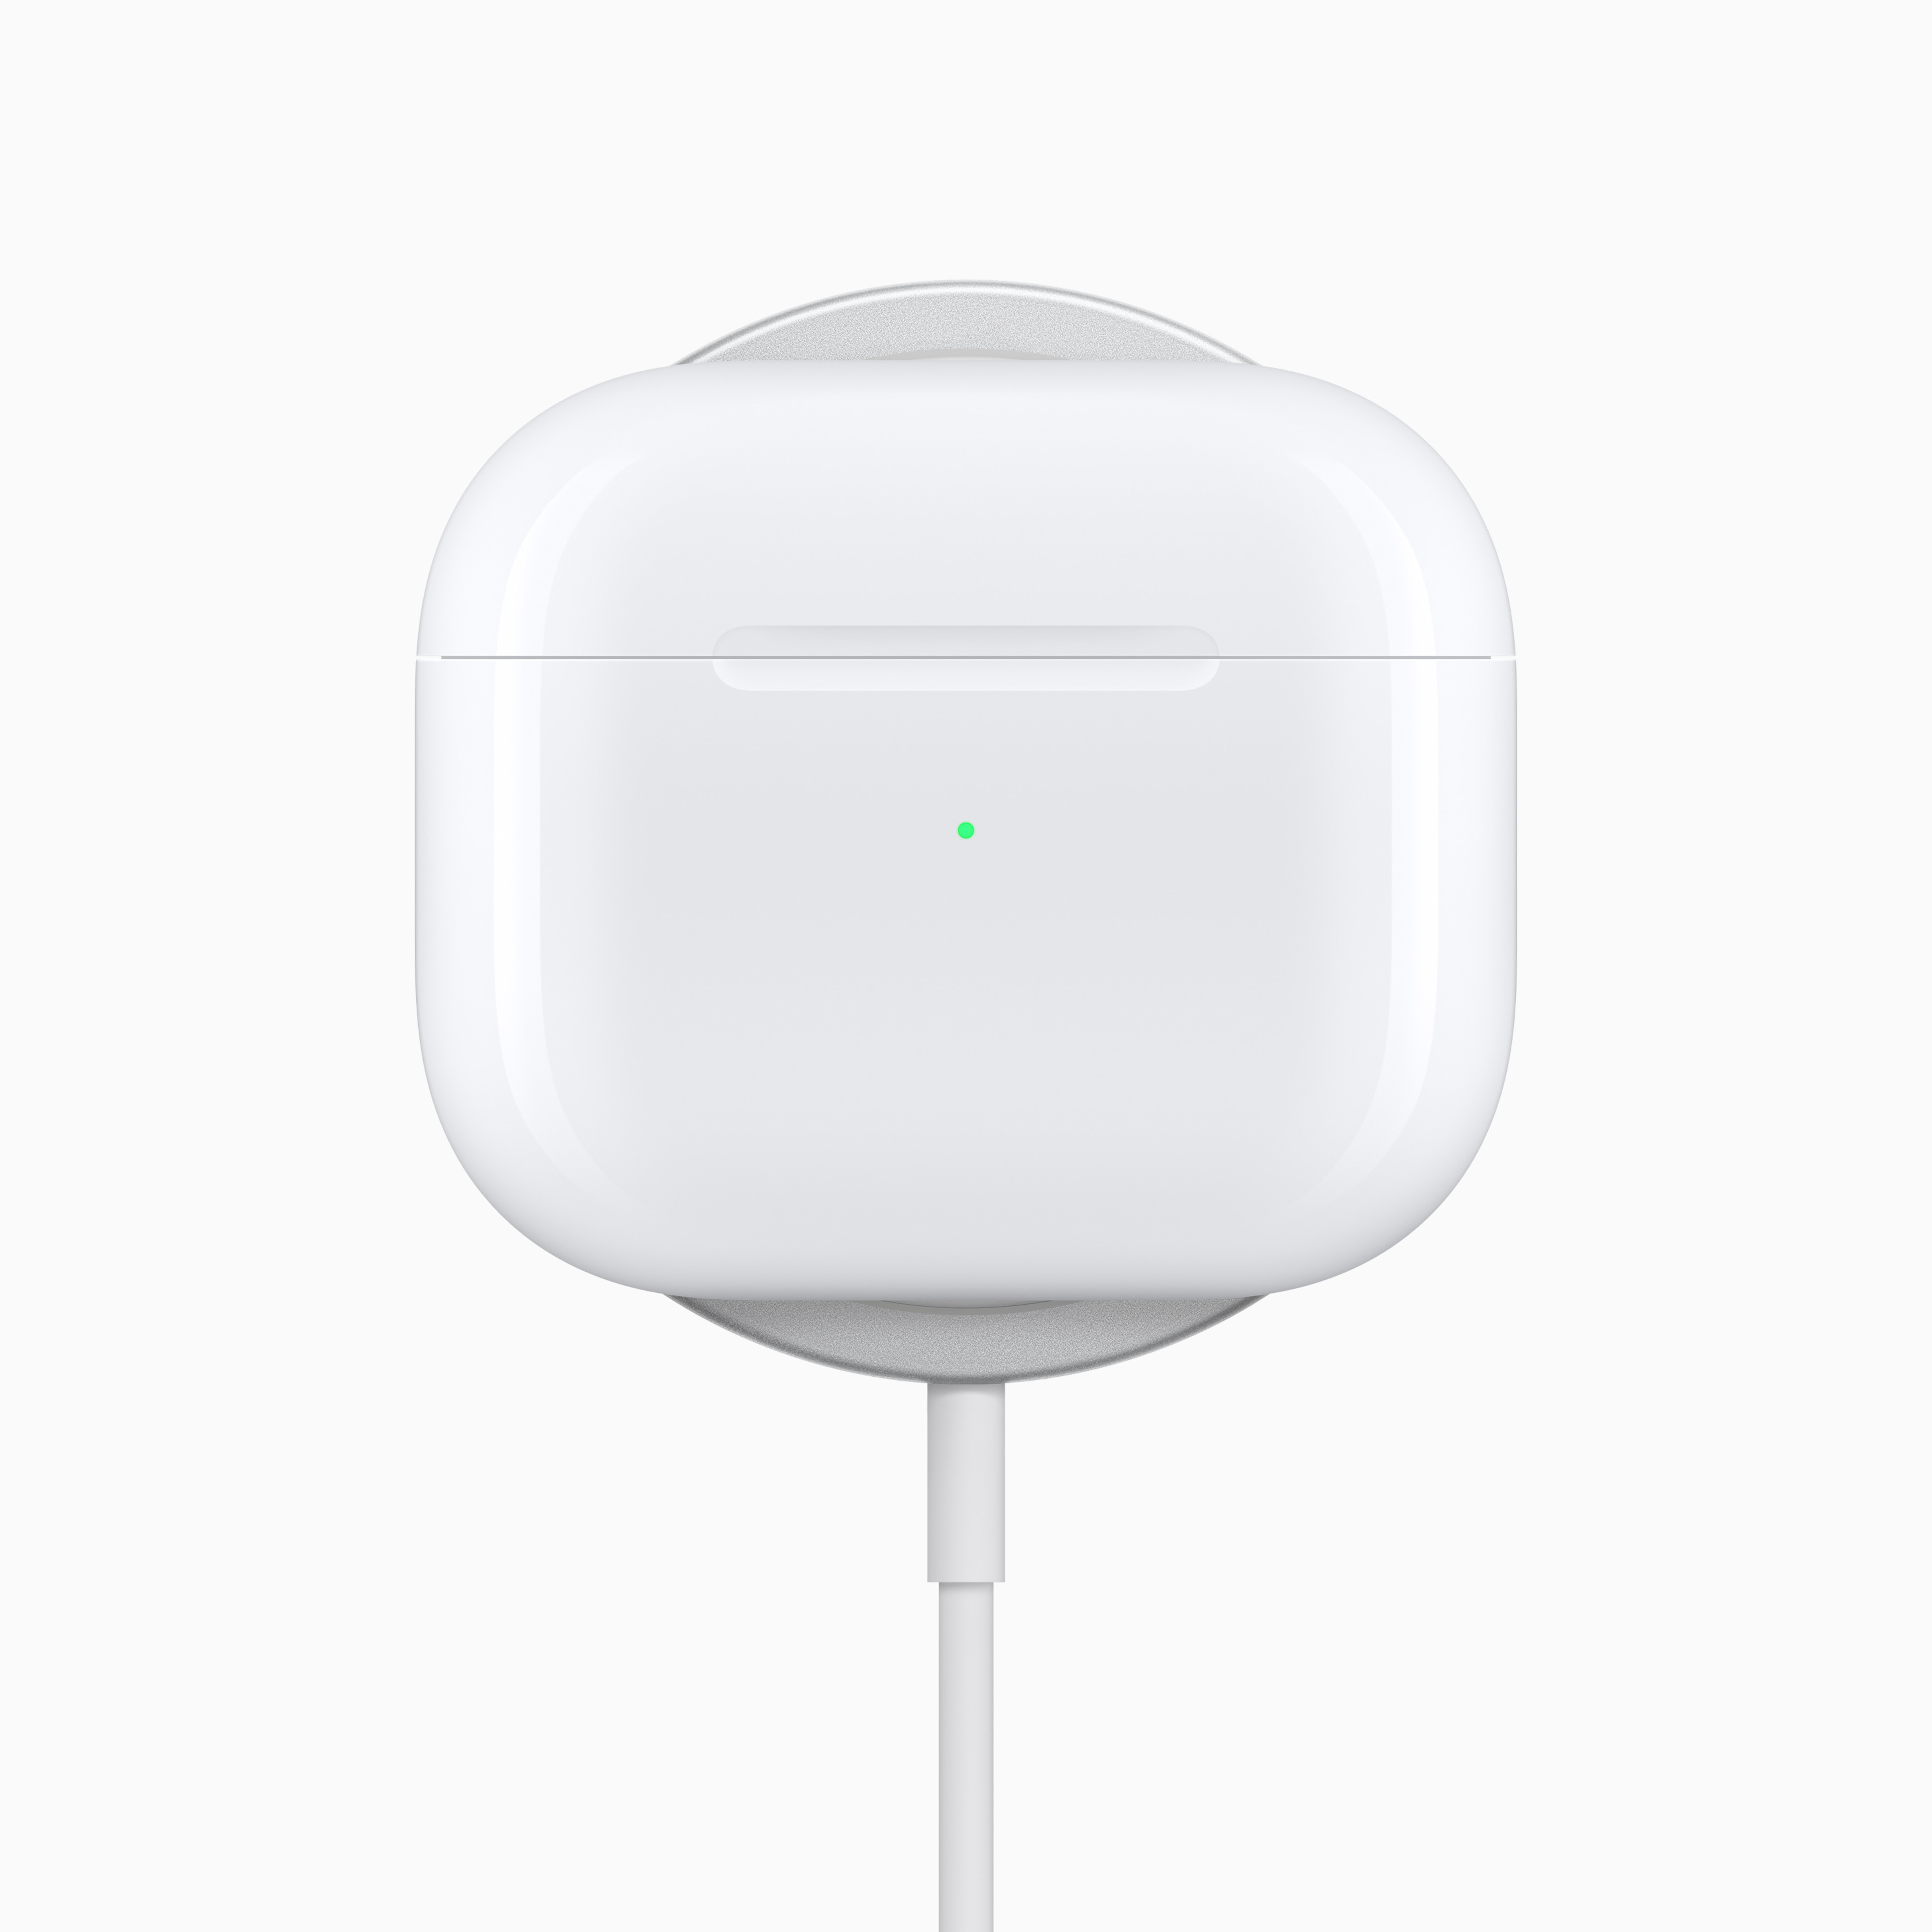 the next generation of AirPods - Apple